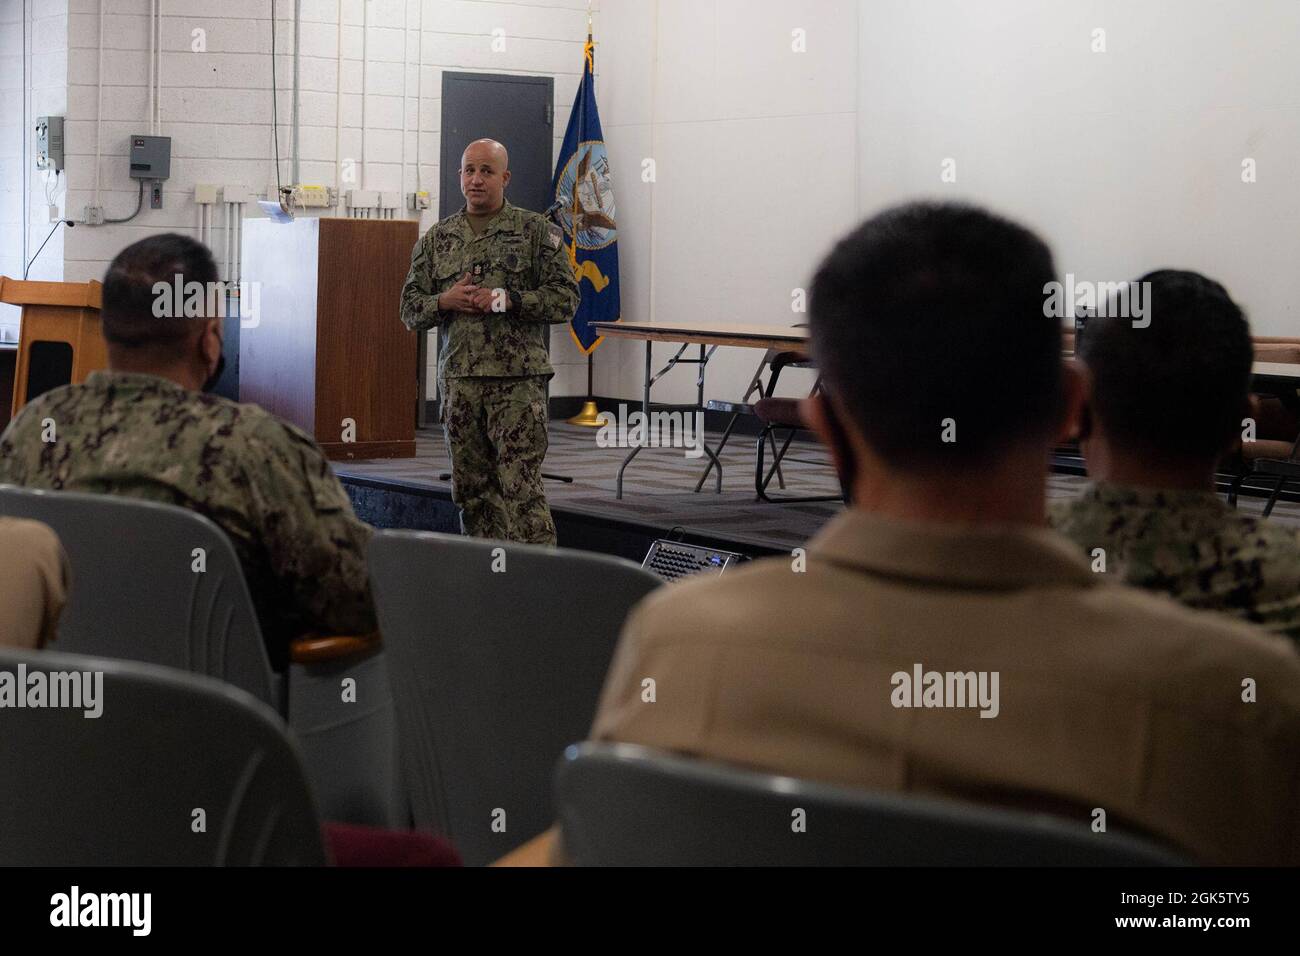 SAN DIEGO (Aug. 10, 2021) Master Chief Petty Officer of the Navy Russell L. Smith speaks to command master chiefs assigned to Commander Naval Air Force, U.S. Pacific Fleet during a visit to Naval Air Station North Island, August 10, 2021. Smith took the opportunity to discuss leadership and how naval aviation will support present and future combat readiness. Stock Photo